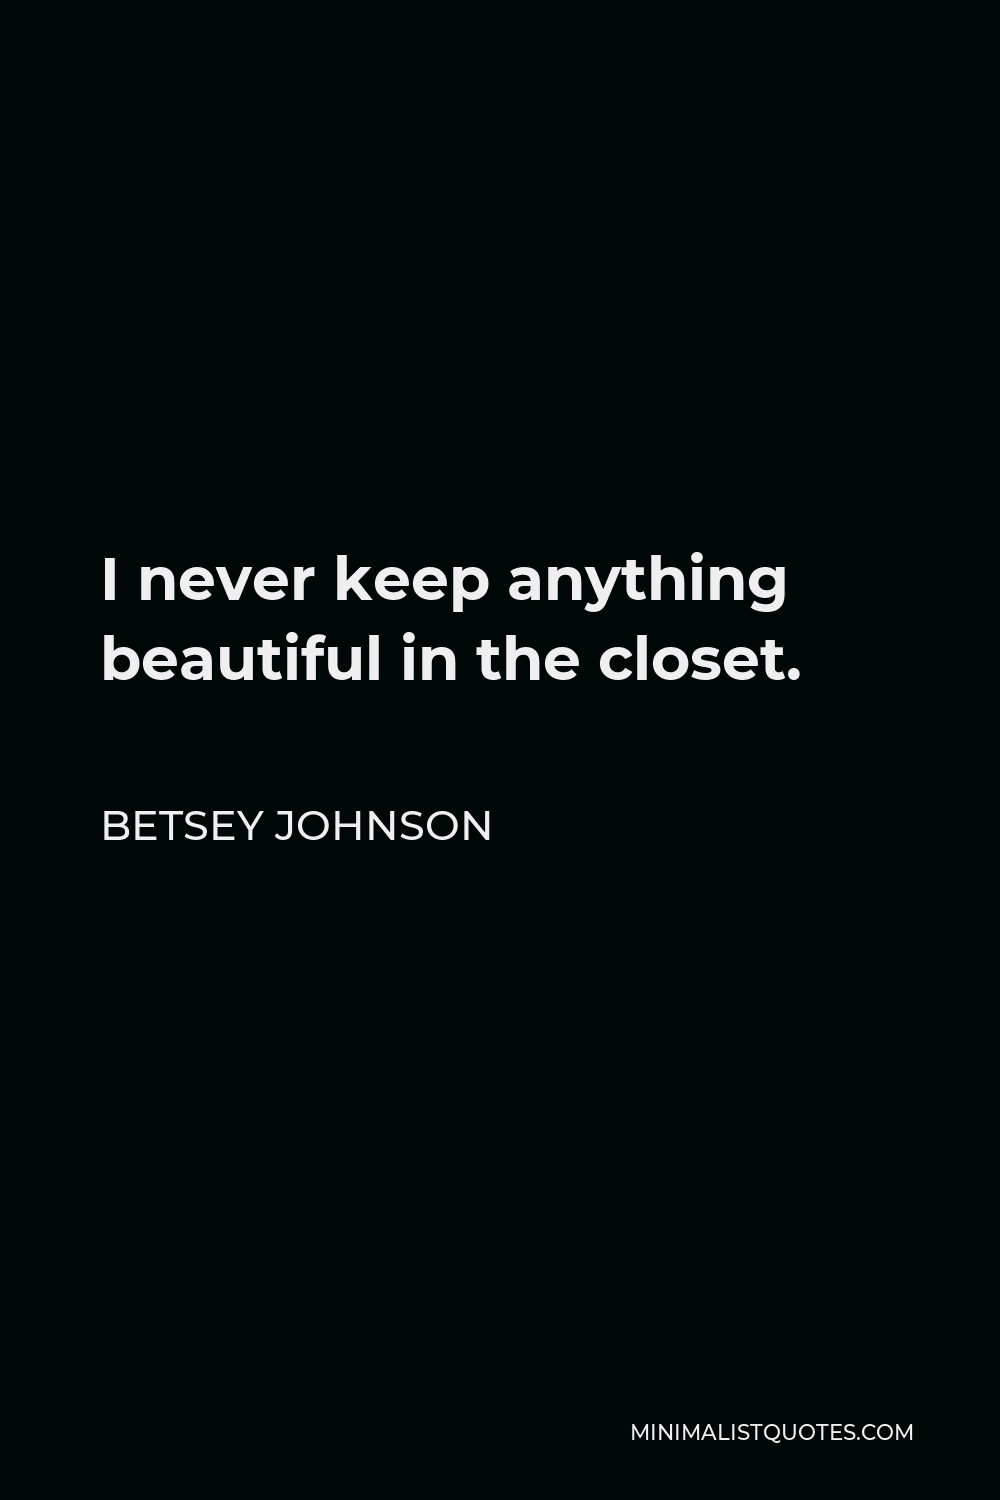 Betsey Johnson Quote - I never keep anything beautiful in the closet.